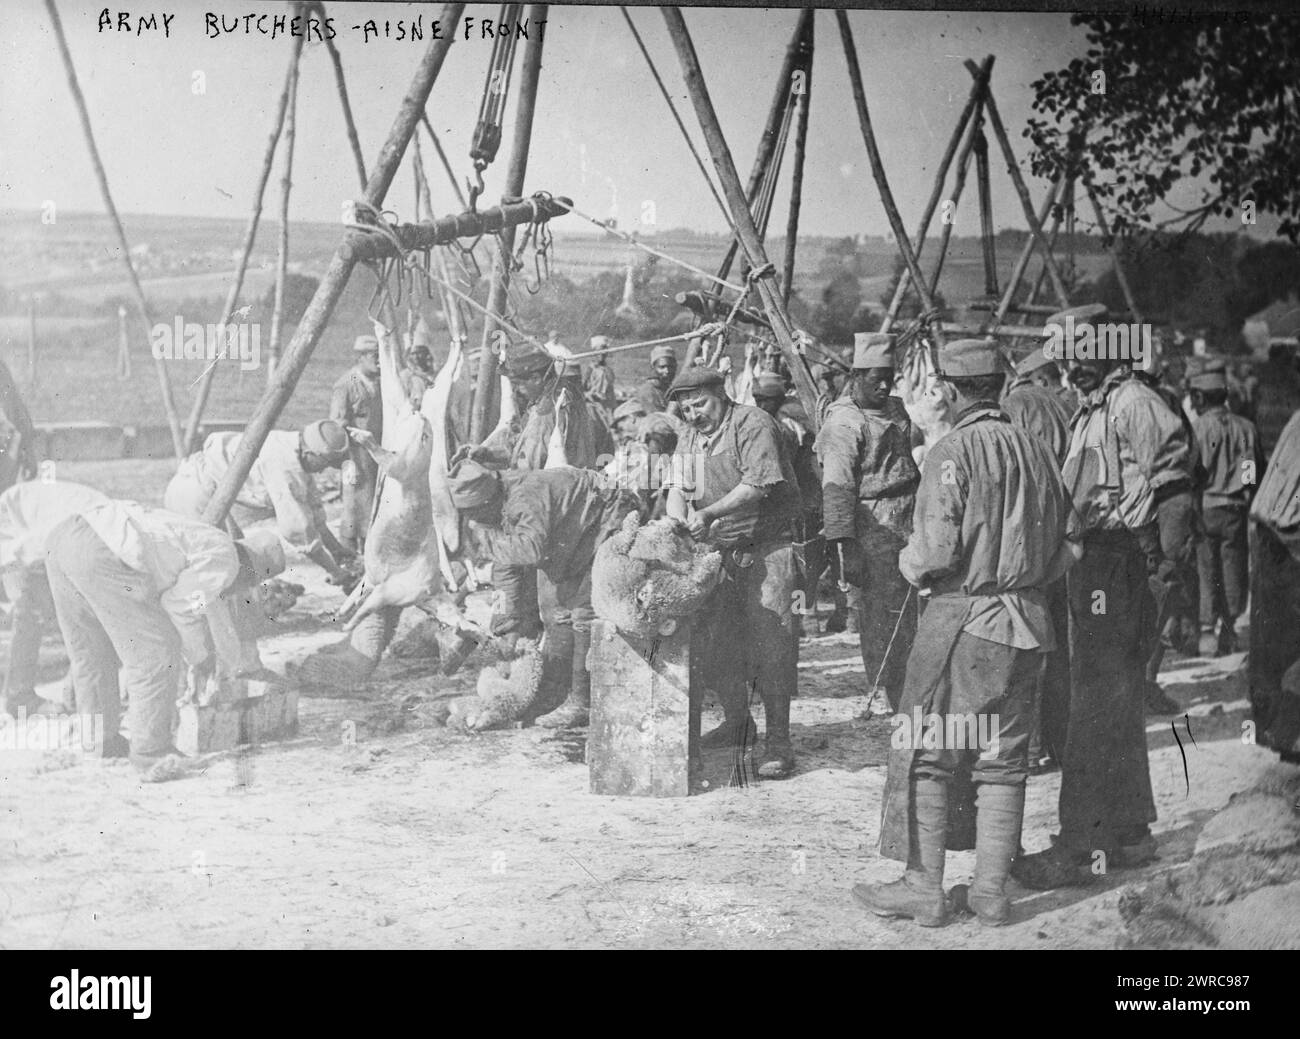 Army butchers, Aisne Front, Photograph shows army butchers with a hanging carcass on the Aisne, (France) front during World War I., between ca. 1915 and 1918, World War, 1914-1918, Glass negatives, 1 negative: glass Stock Photo